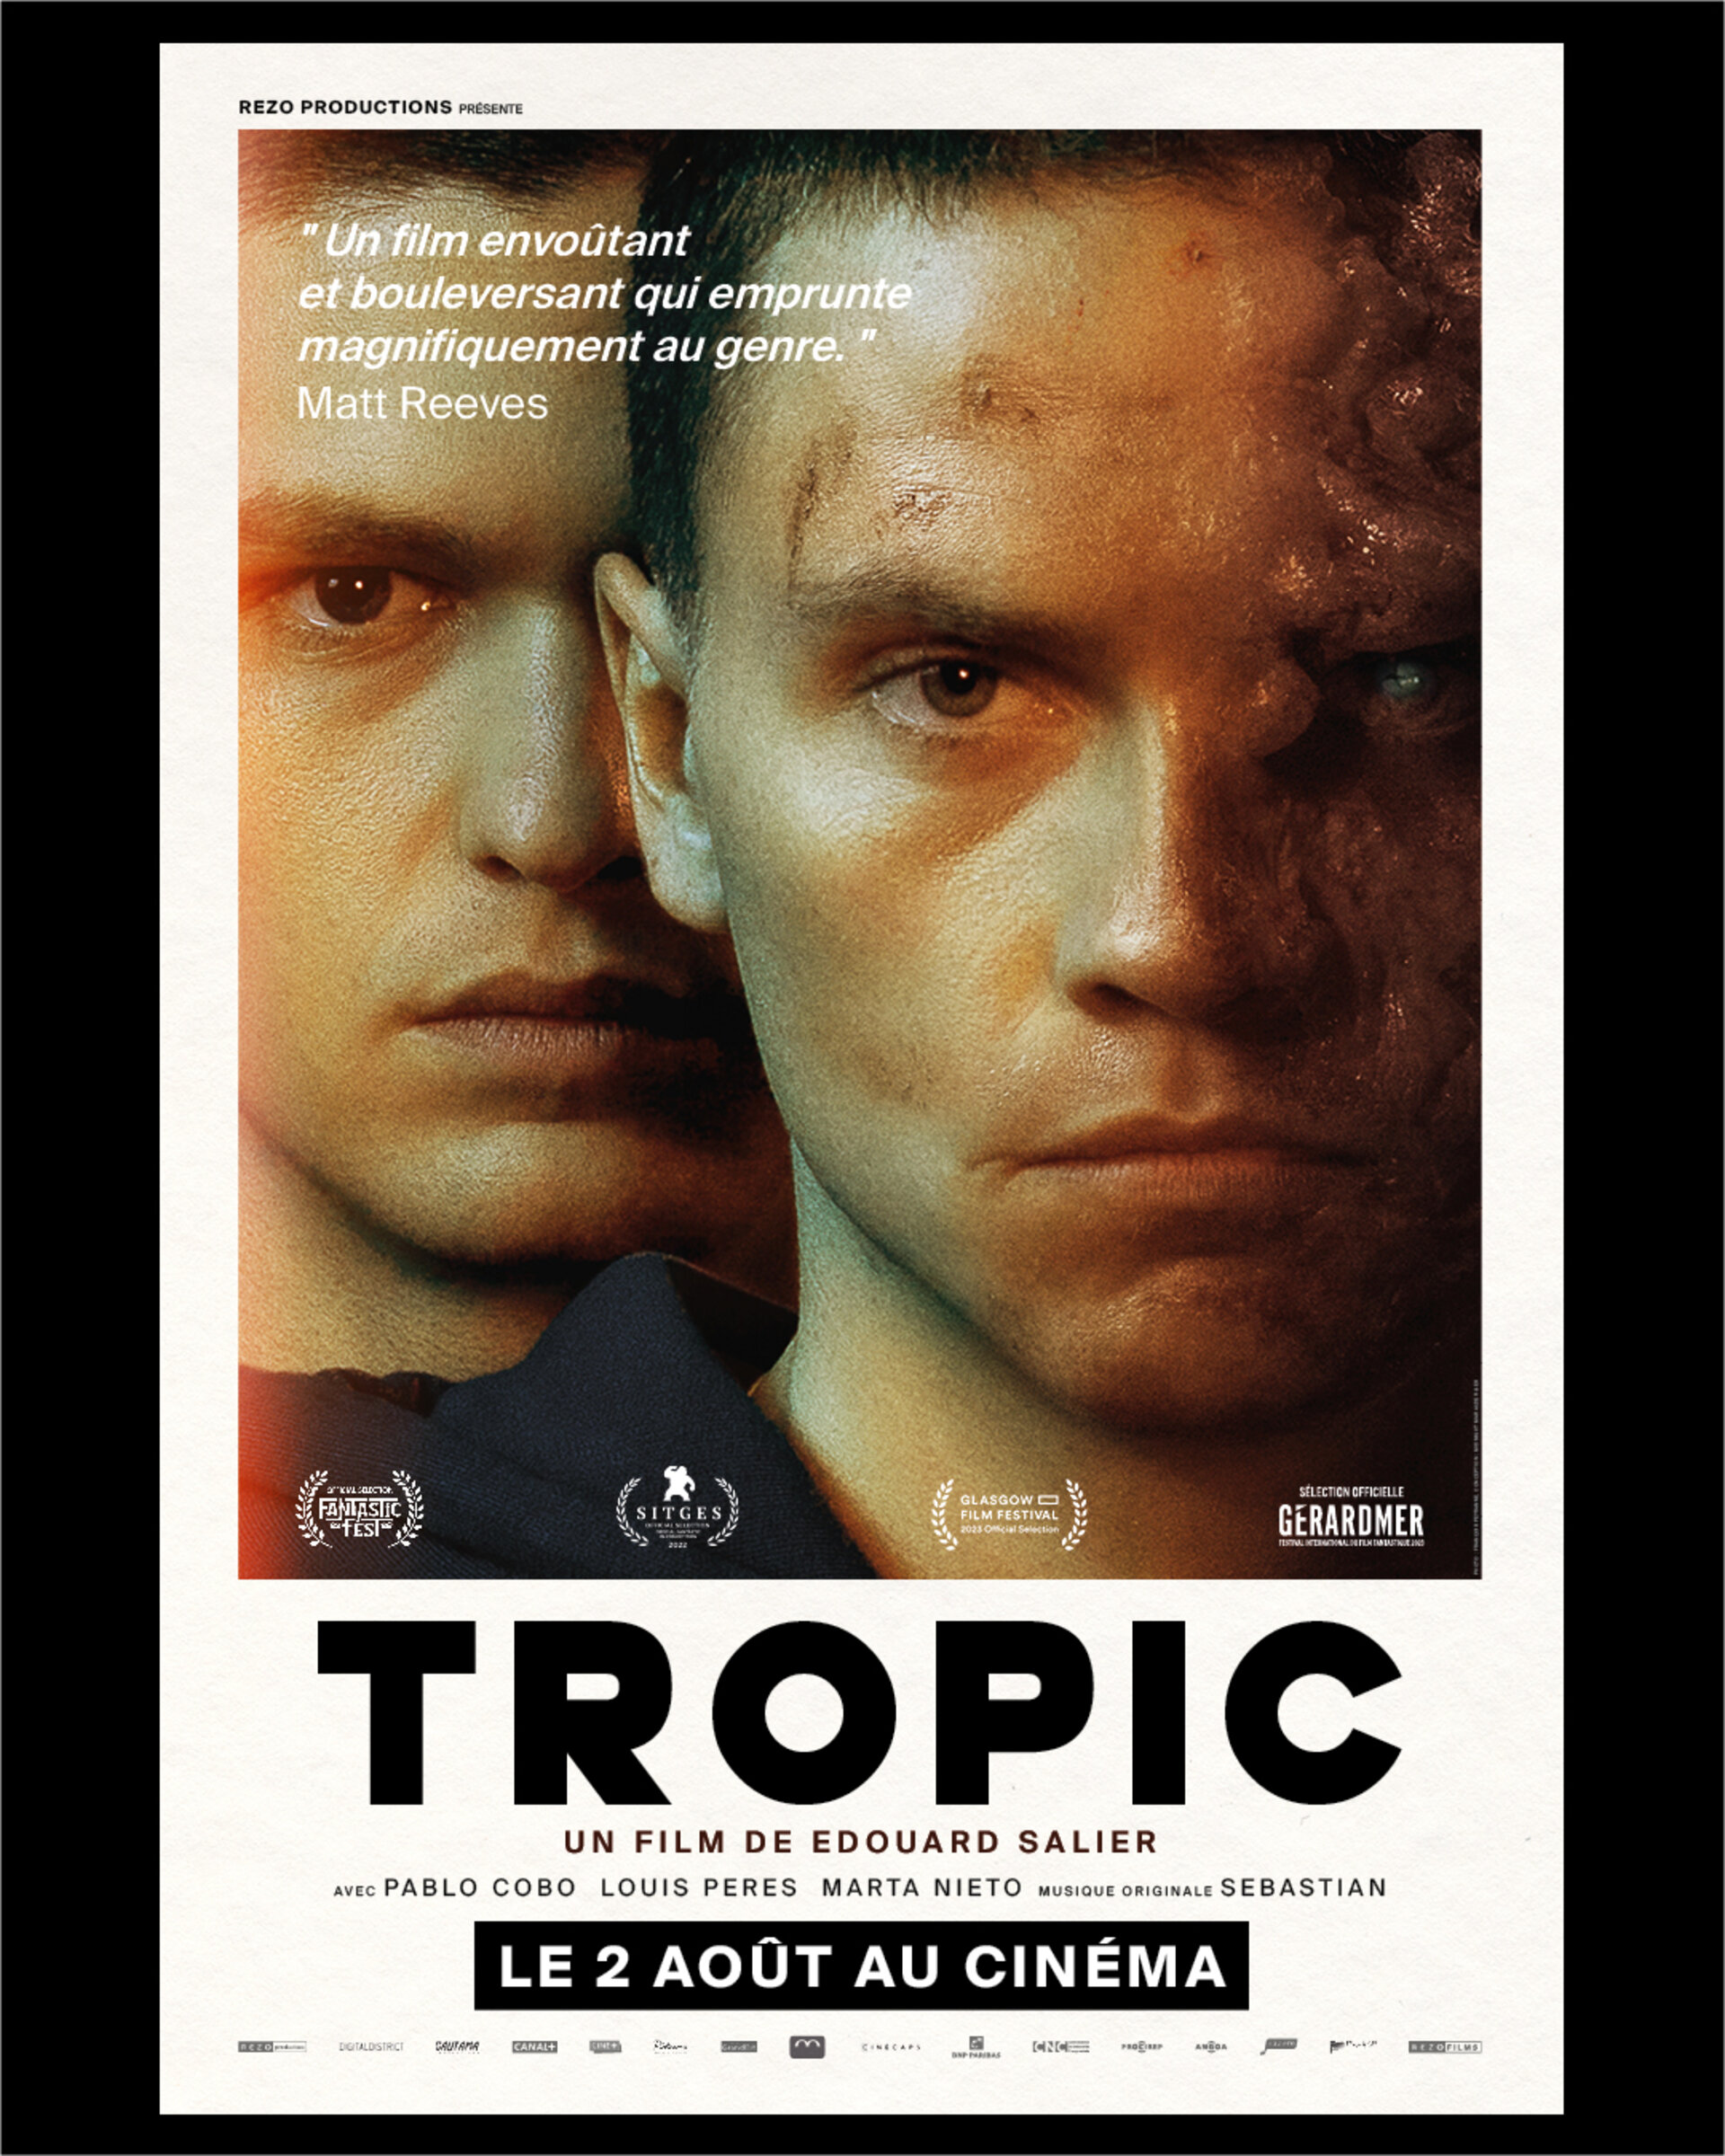 Poster for the sci-fi movie Tropic.